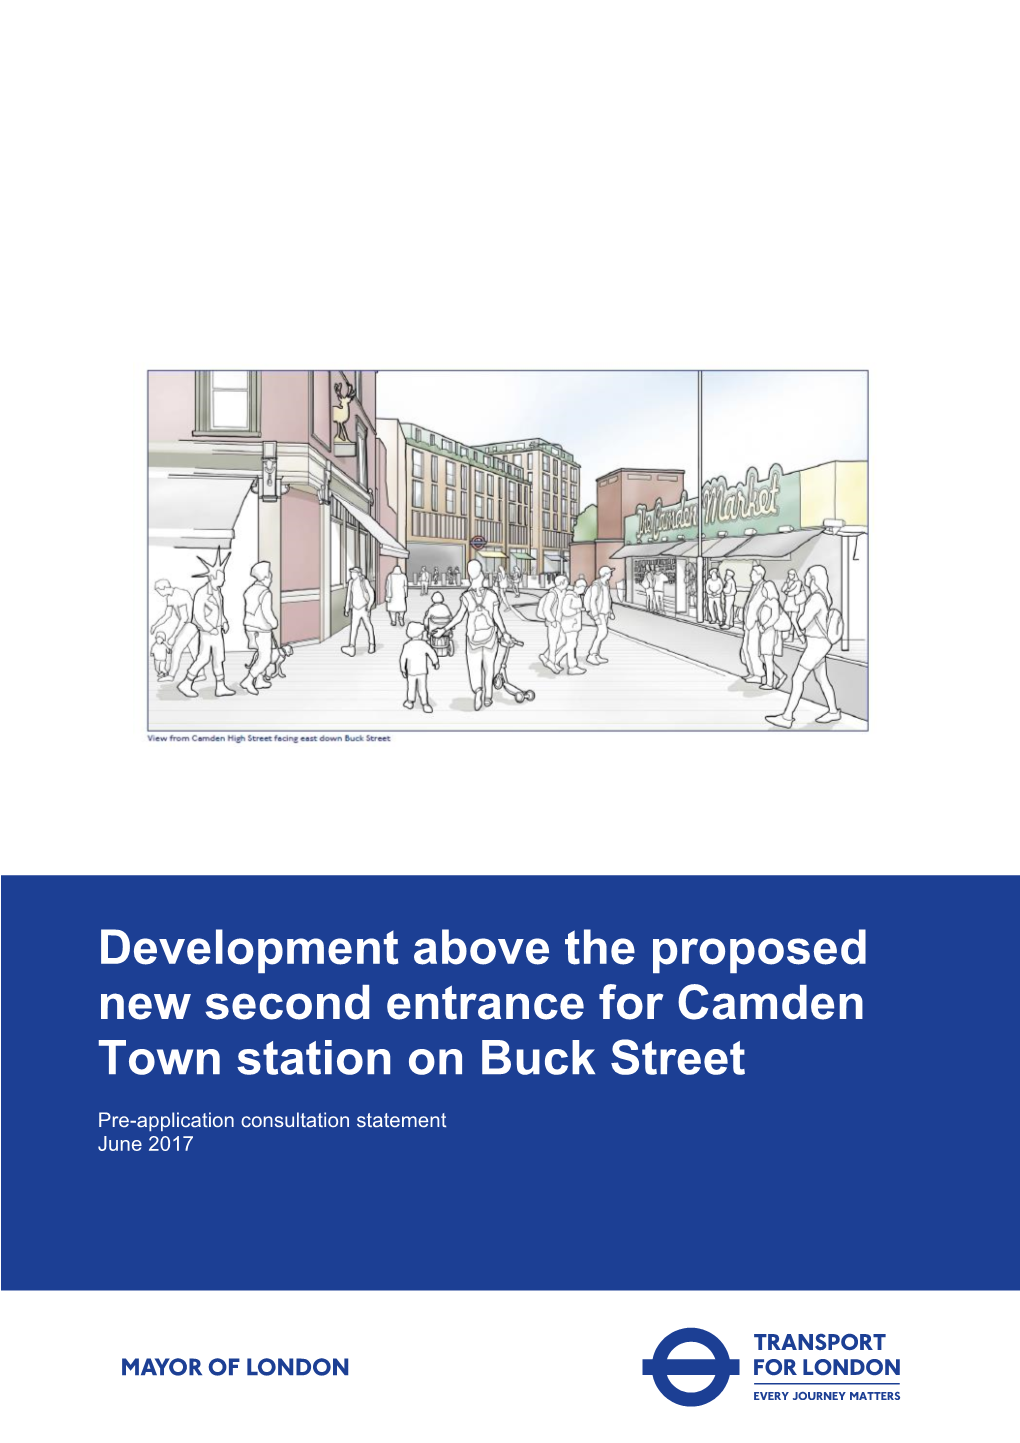 Development Above the Proposed Second Entrance for Camden Town Station on Buck Street